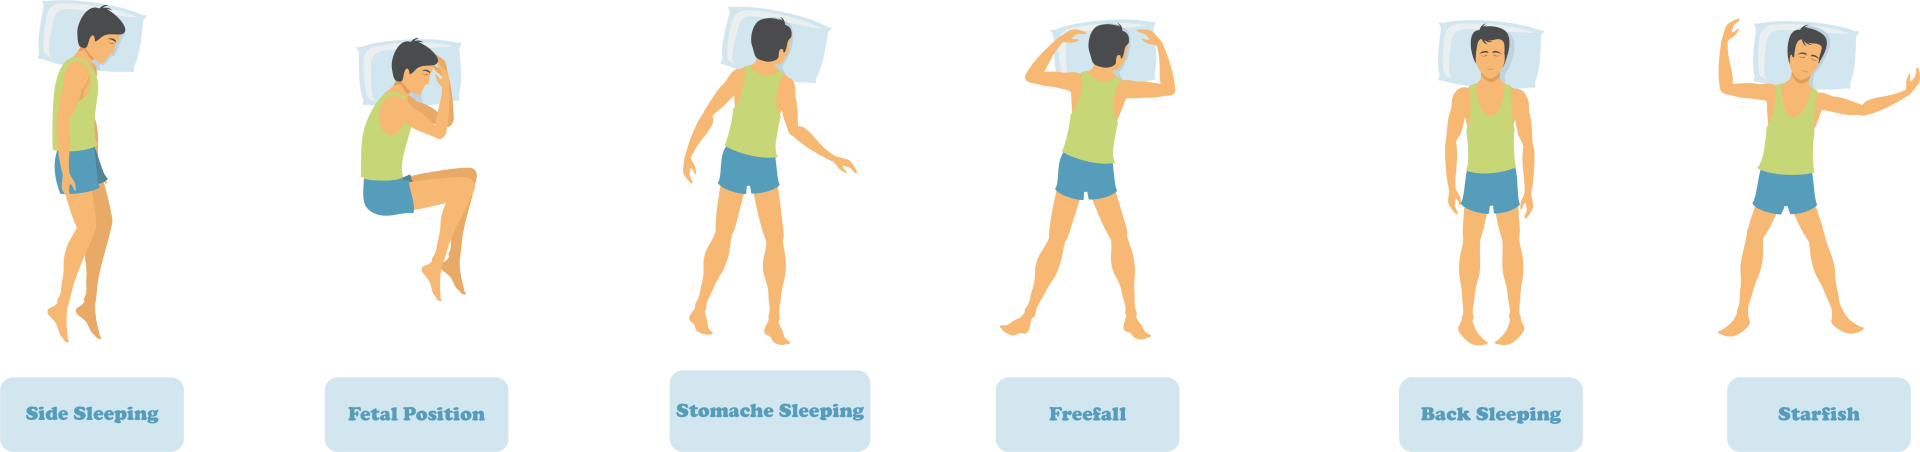 Image of various sleep positions